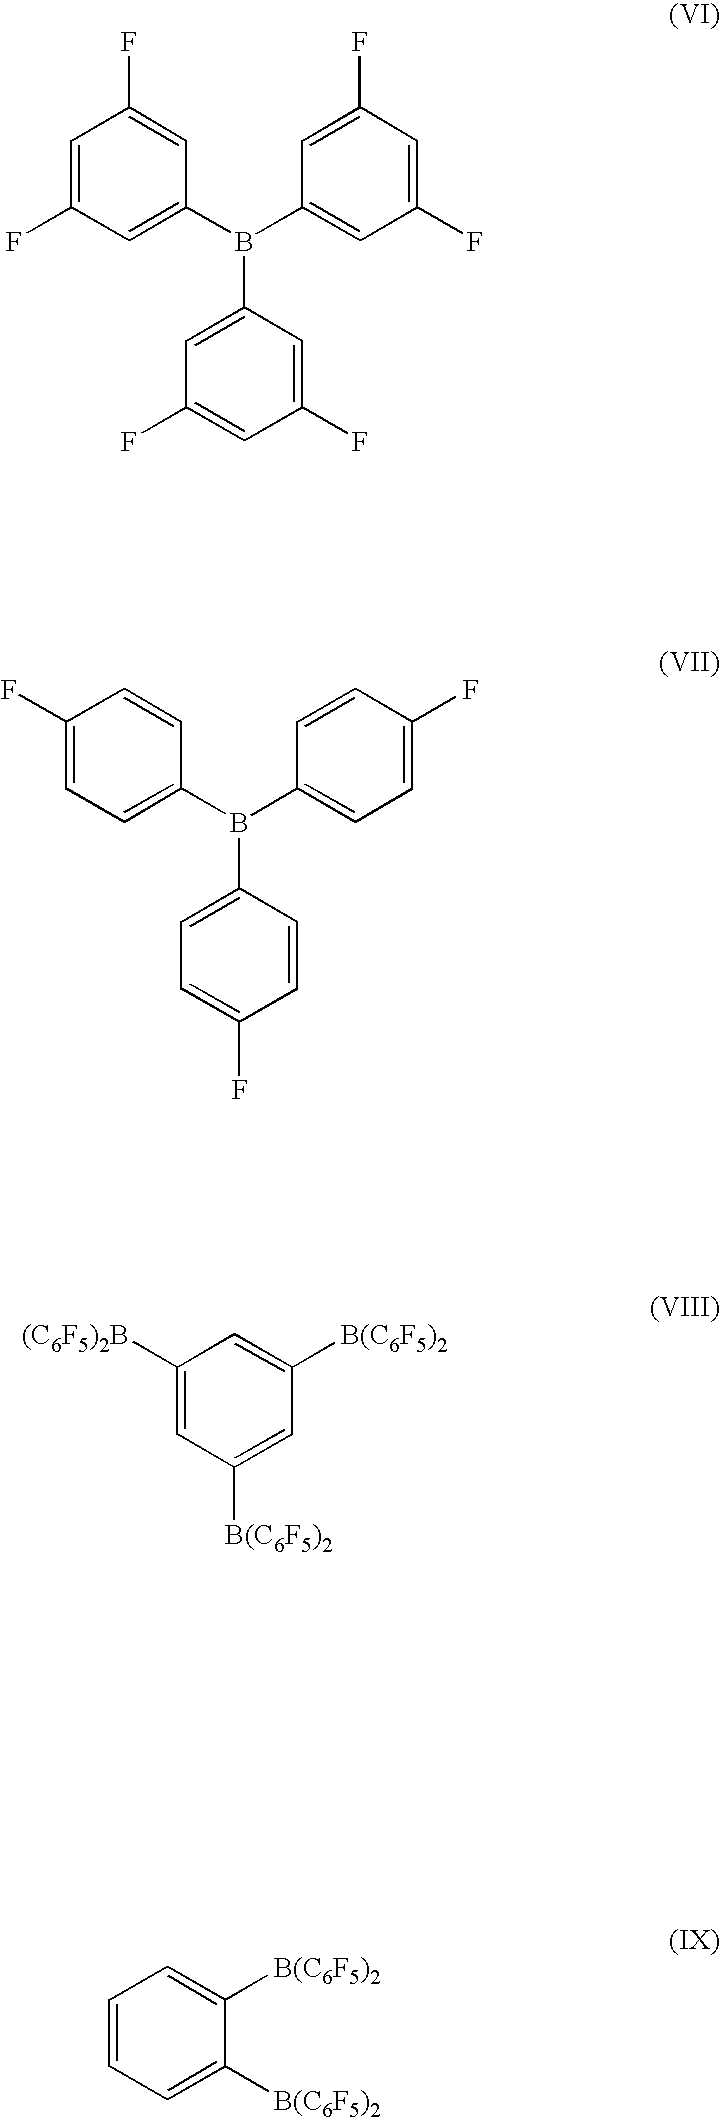 Process for synthesis of diorganosilanes by disproportionation of hydridosiloxanes